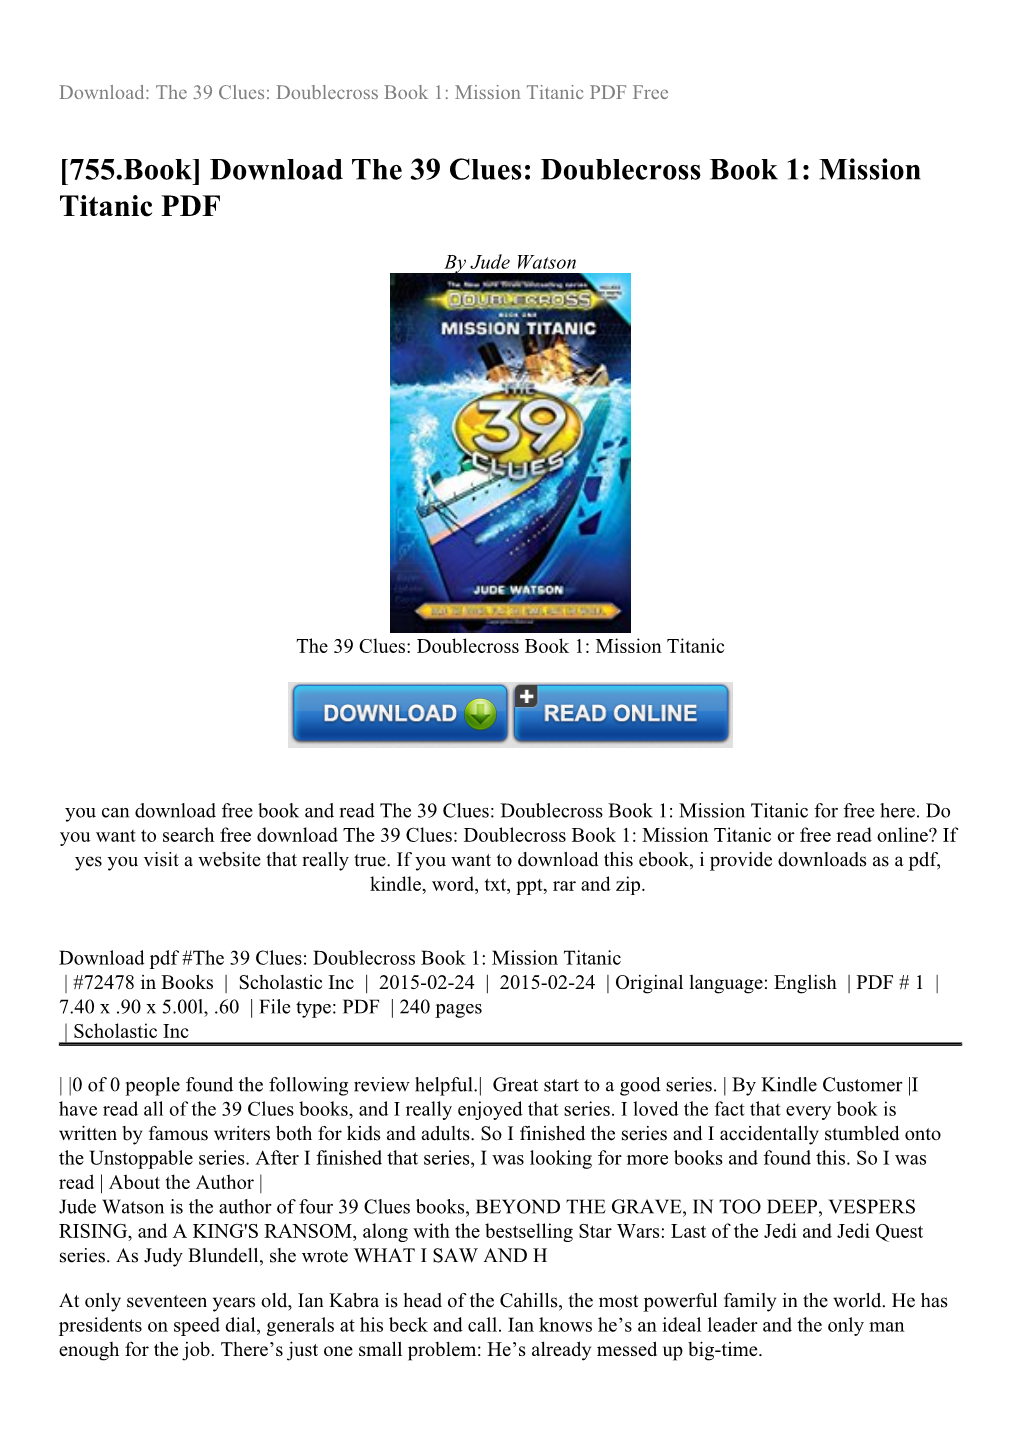 Download the 39 Clues: Doublecross Book 1: Mission Titanic PDF